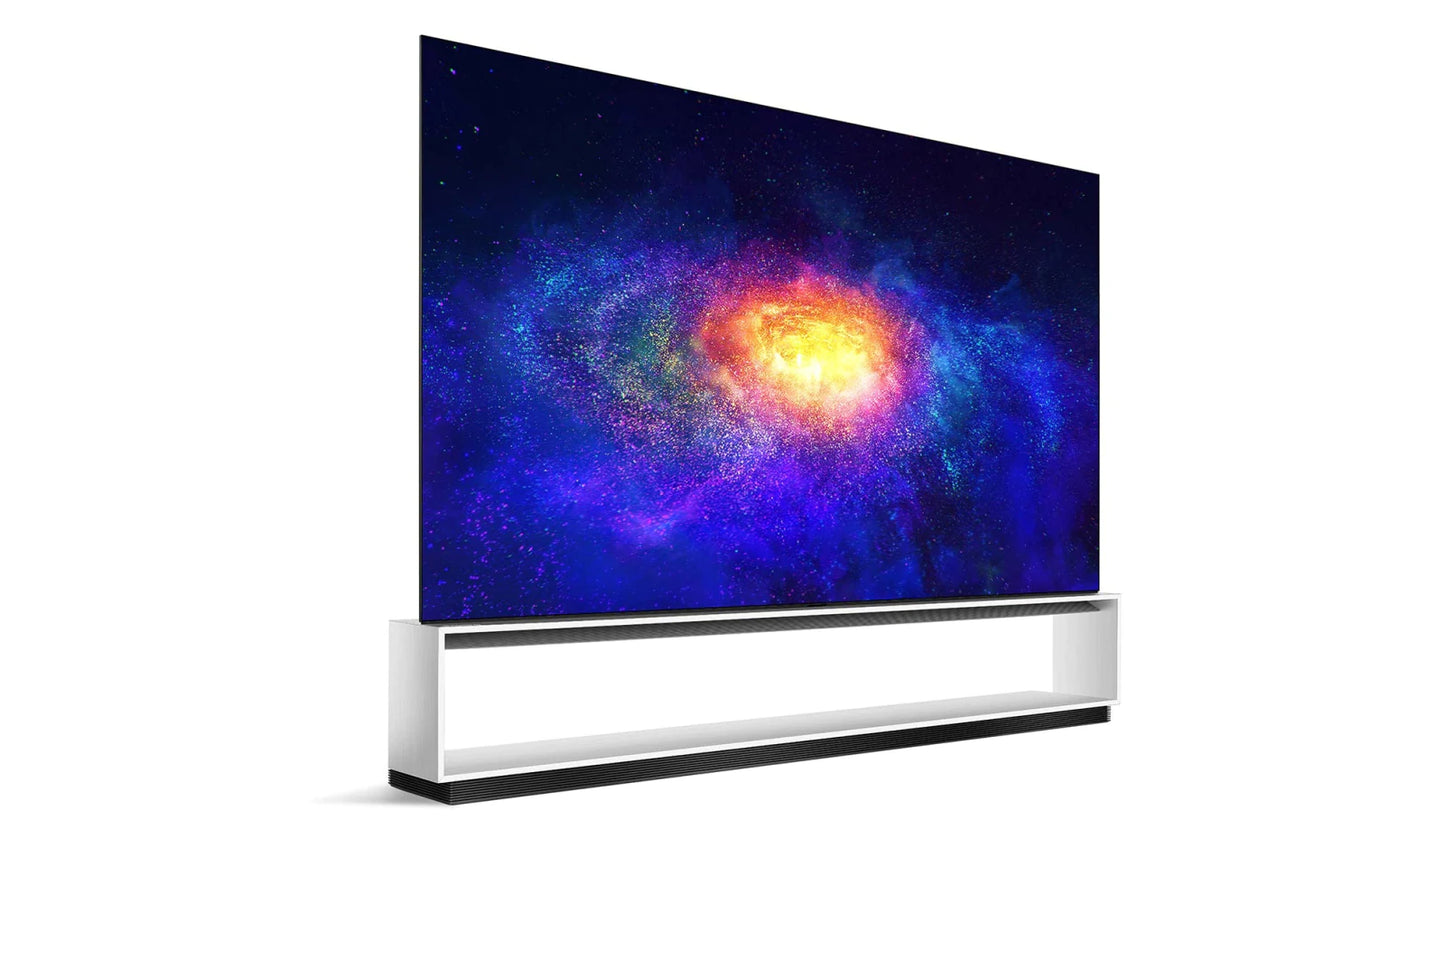 LG OLED TV 88 Inch SIGNATURE ZX Series Smart Tv - 88 ZXPVA, Gallery Design 8K TV Cinema HDR WebOS Smart AI ThinQ Pixel Dimming